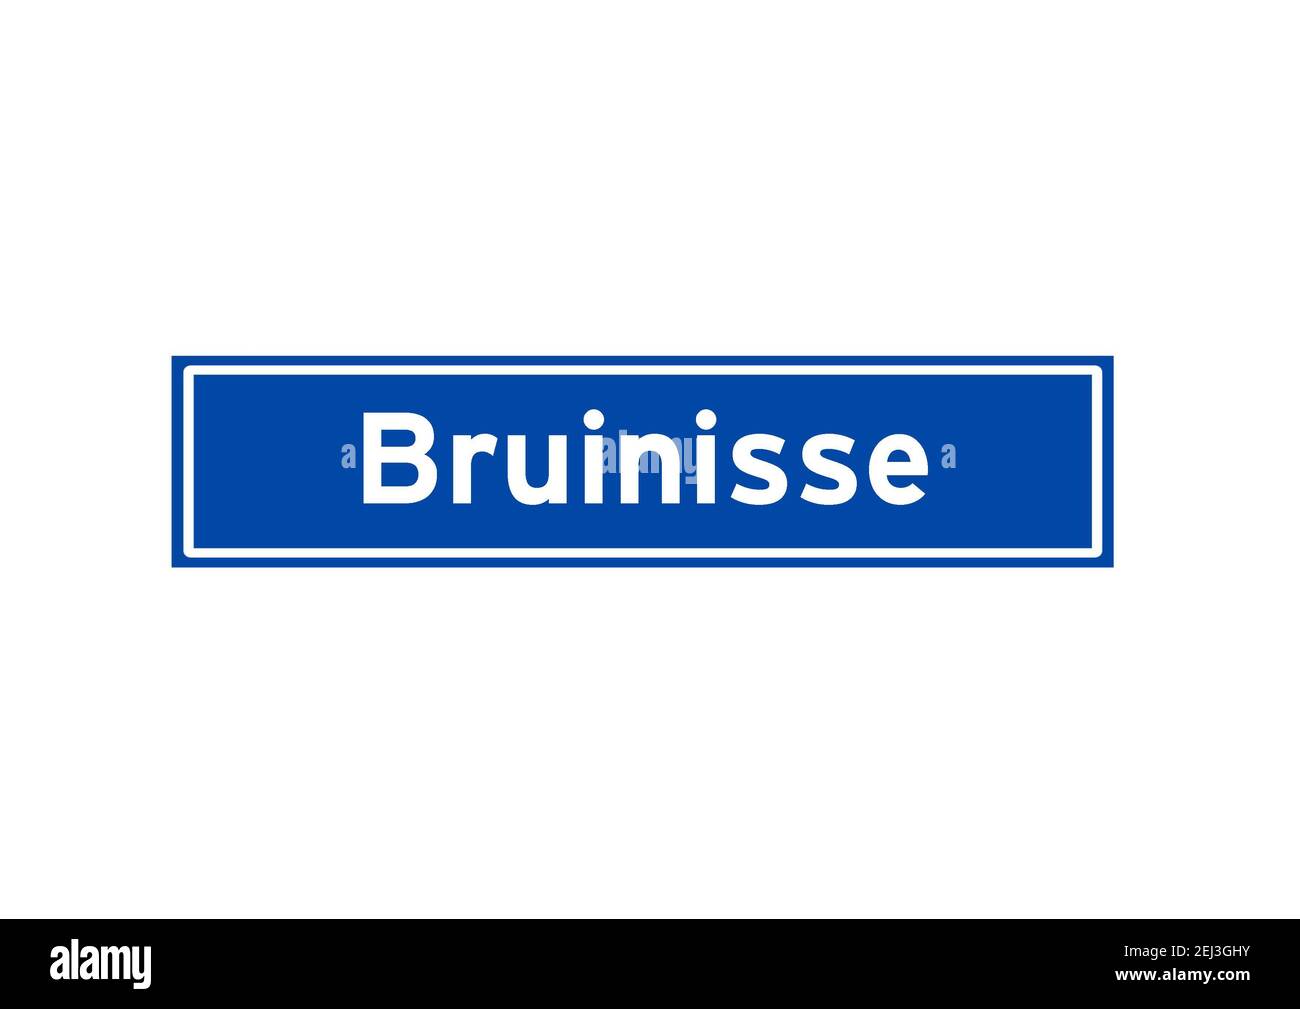 Bruinisse isolated Dutch place name sign. City sign from the Netherlands. Stock Photo